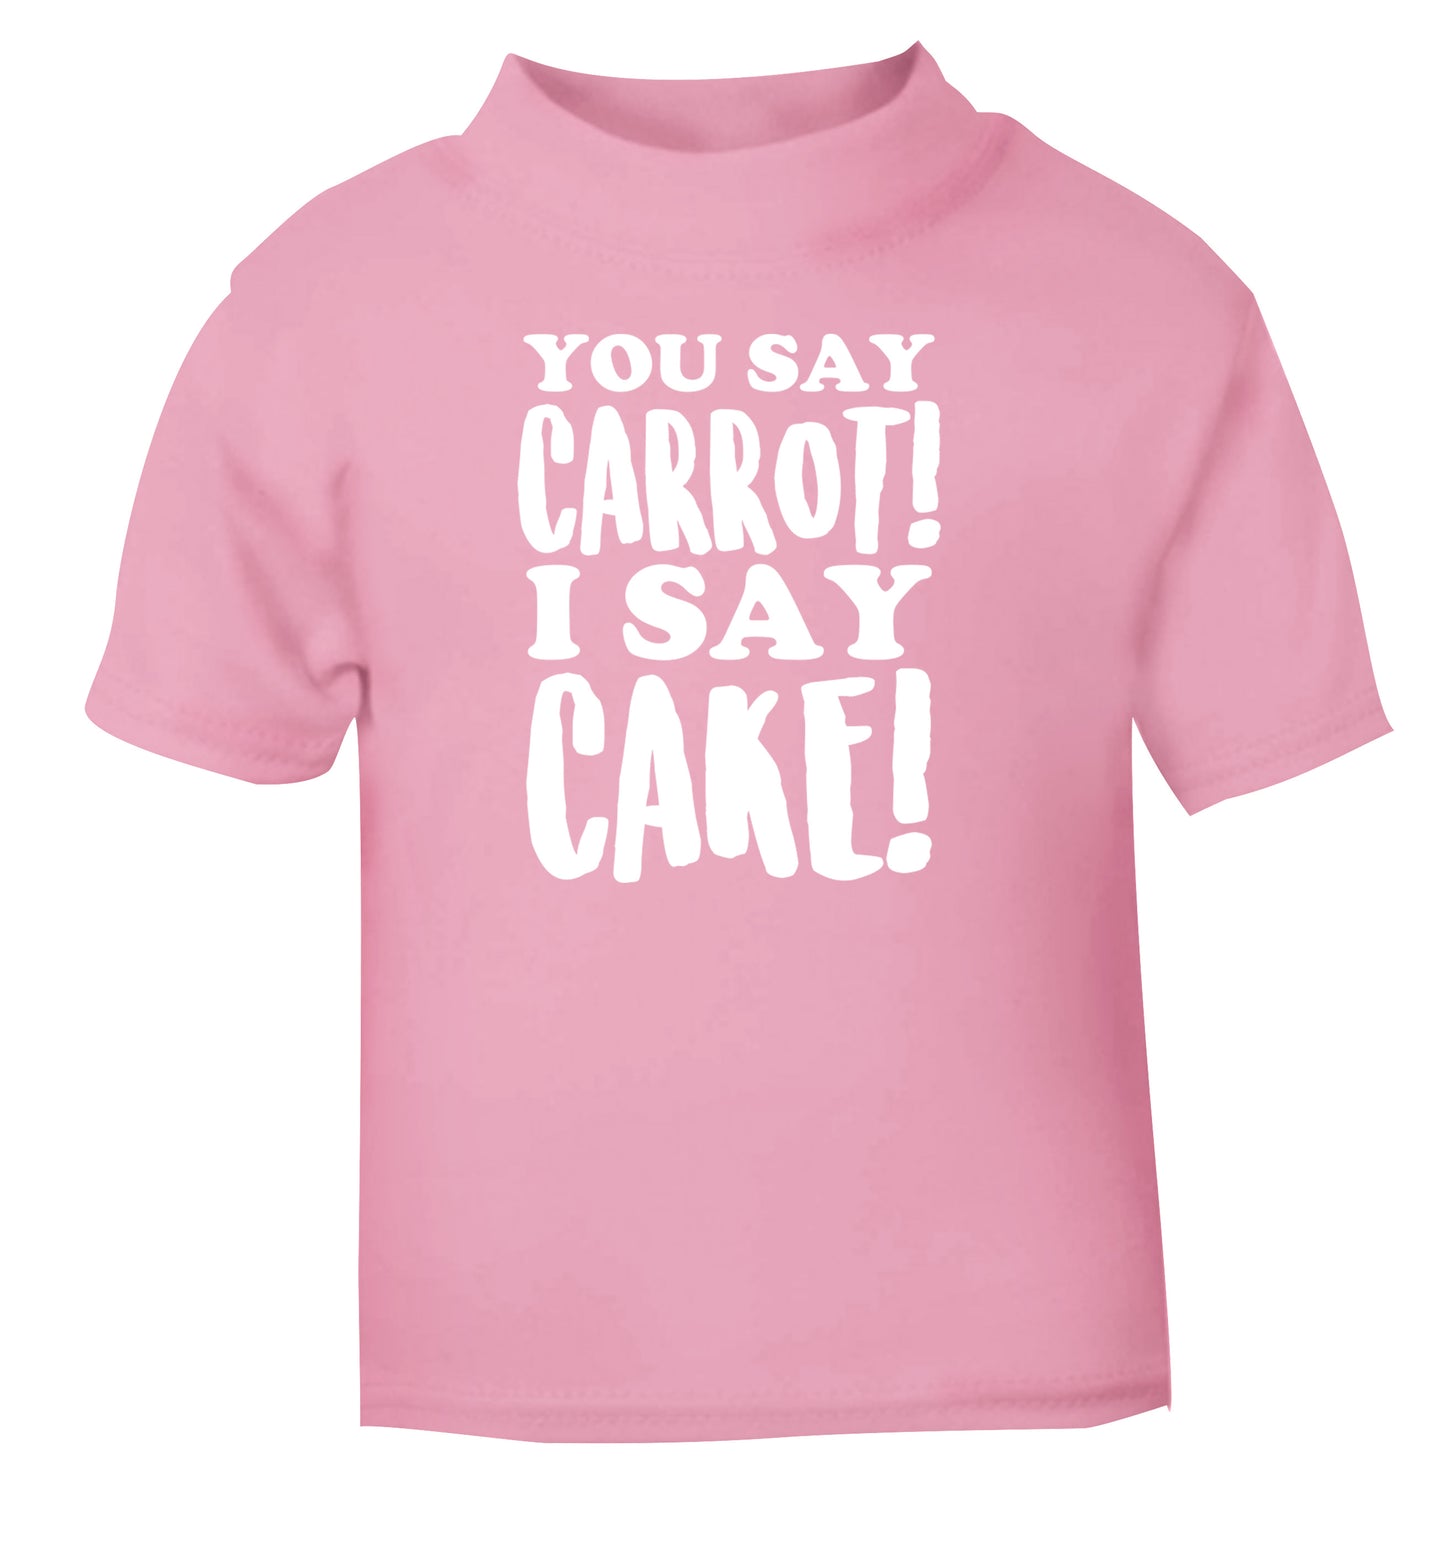 You say carrot I say cake! light pink Baby Toddler Tshirt 2 Years